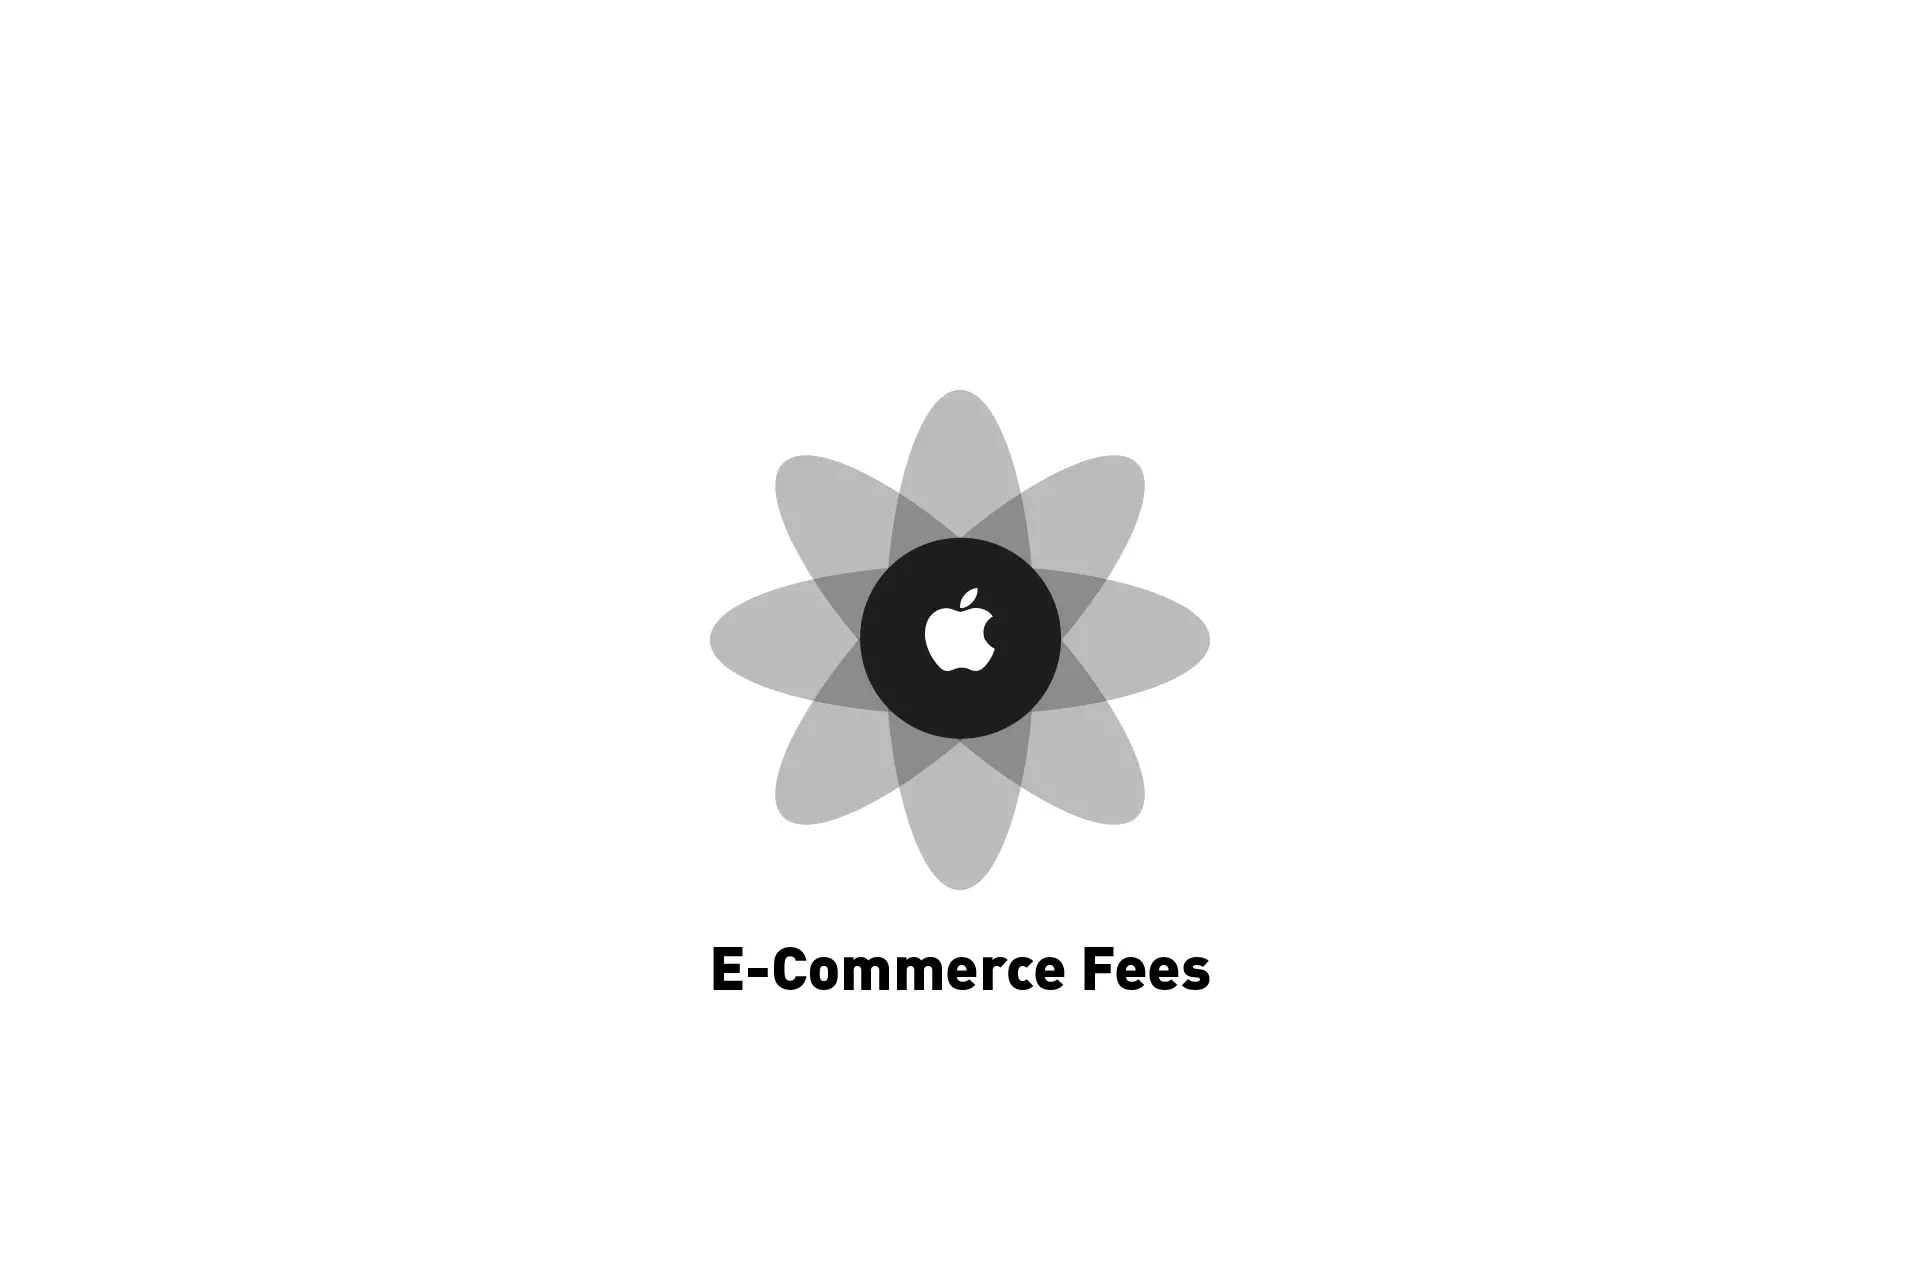 A flower that represents Apple with the text "E-Commerce Fees" beneath it.